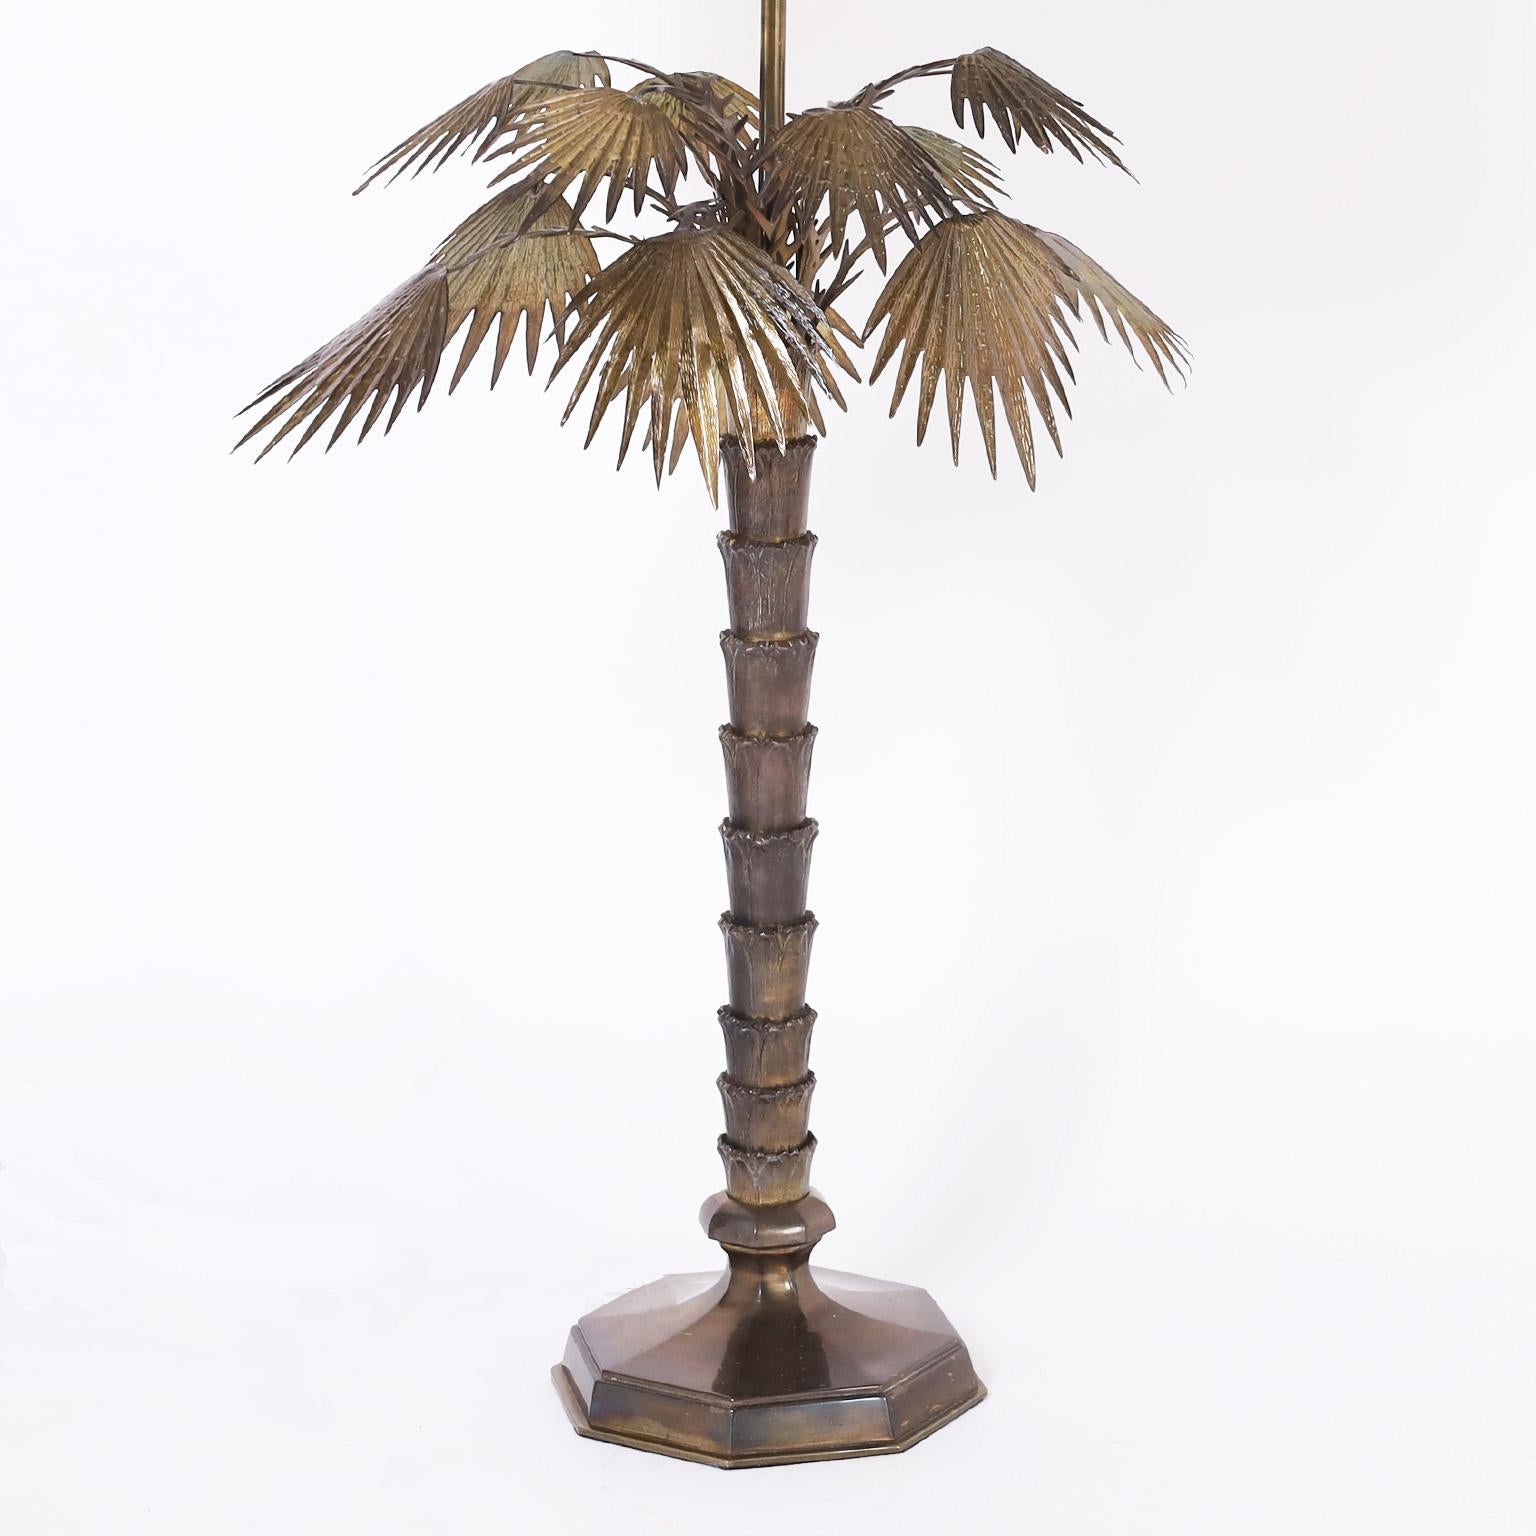 Chic large scale vintage table lamp crafted in bronze in the form of a stylized palm tree with a lush aged patina.